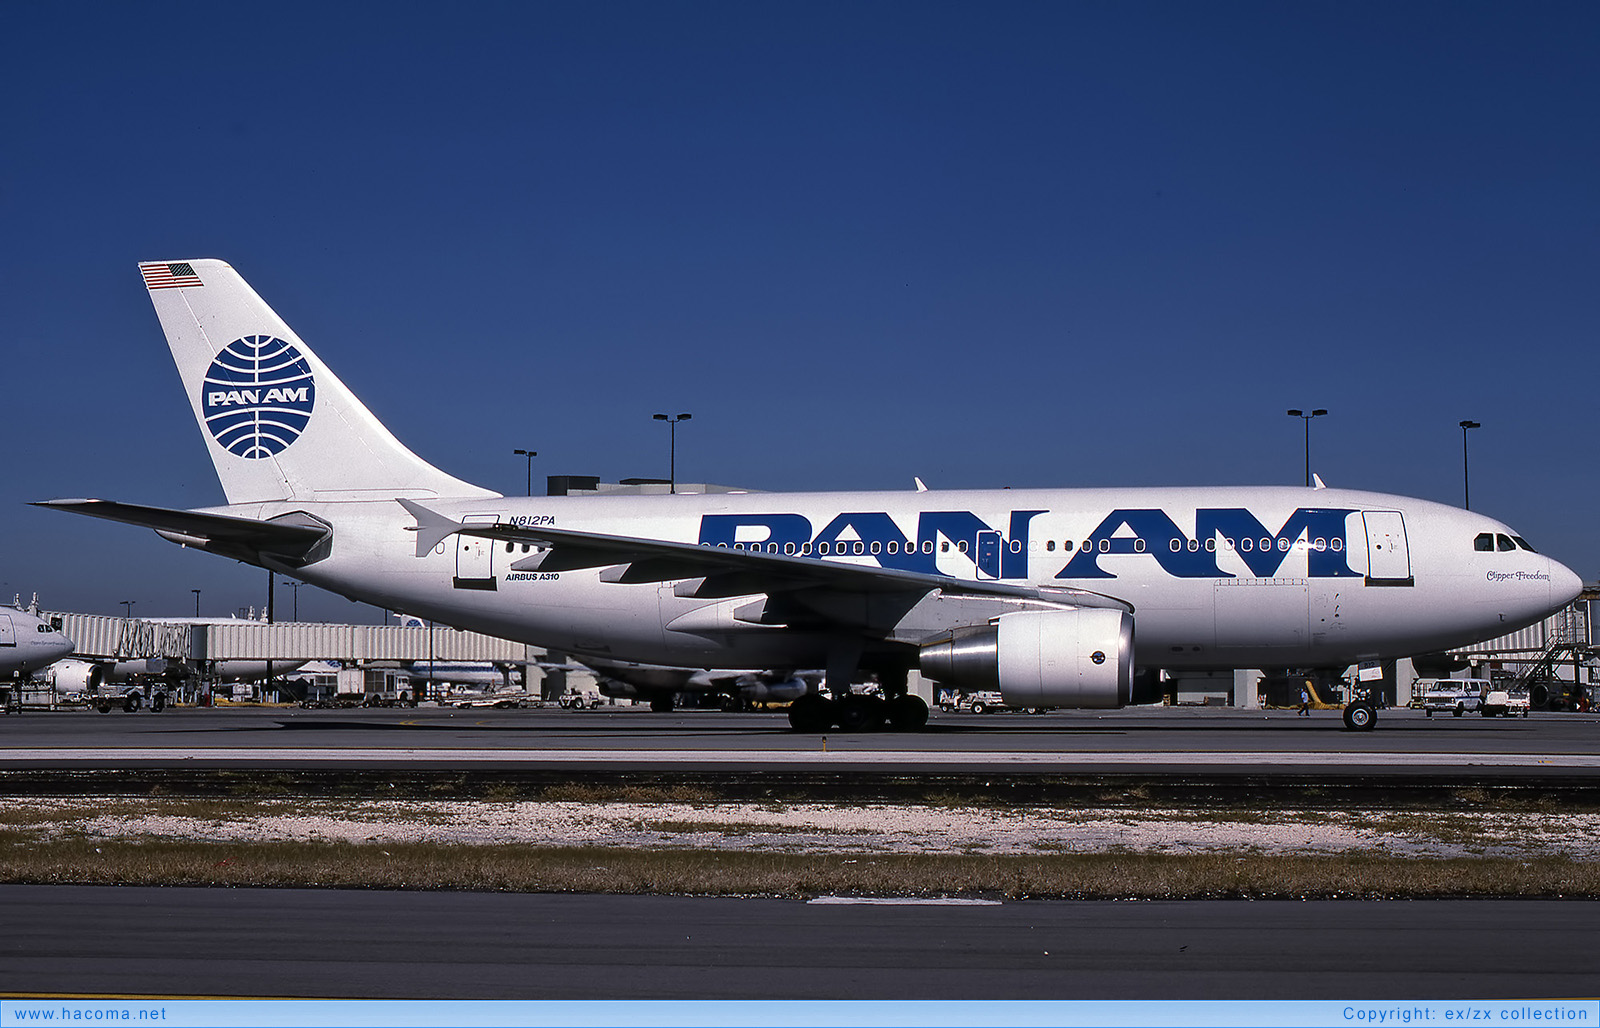 Photo of N812PA - Pan Am Clipper Freedom - Miami International Airport